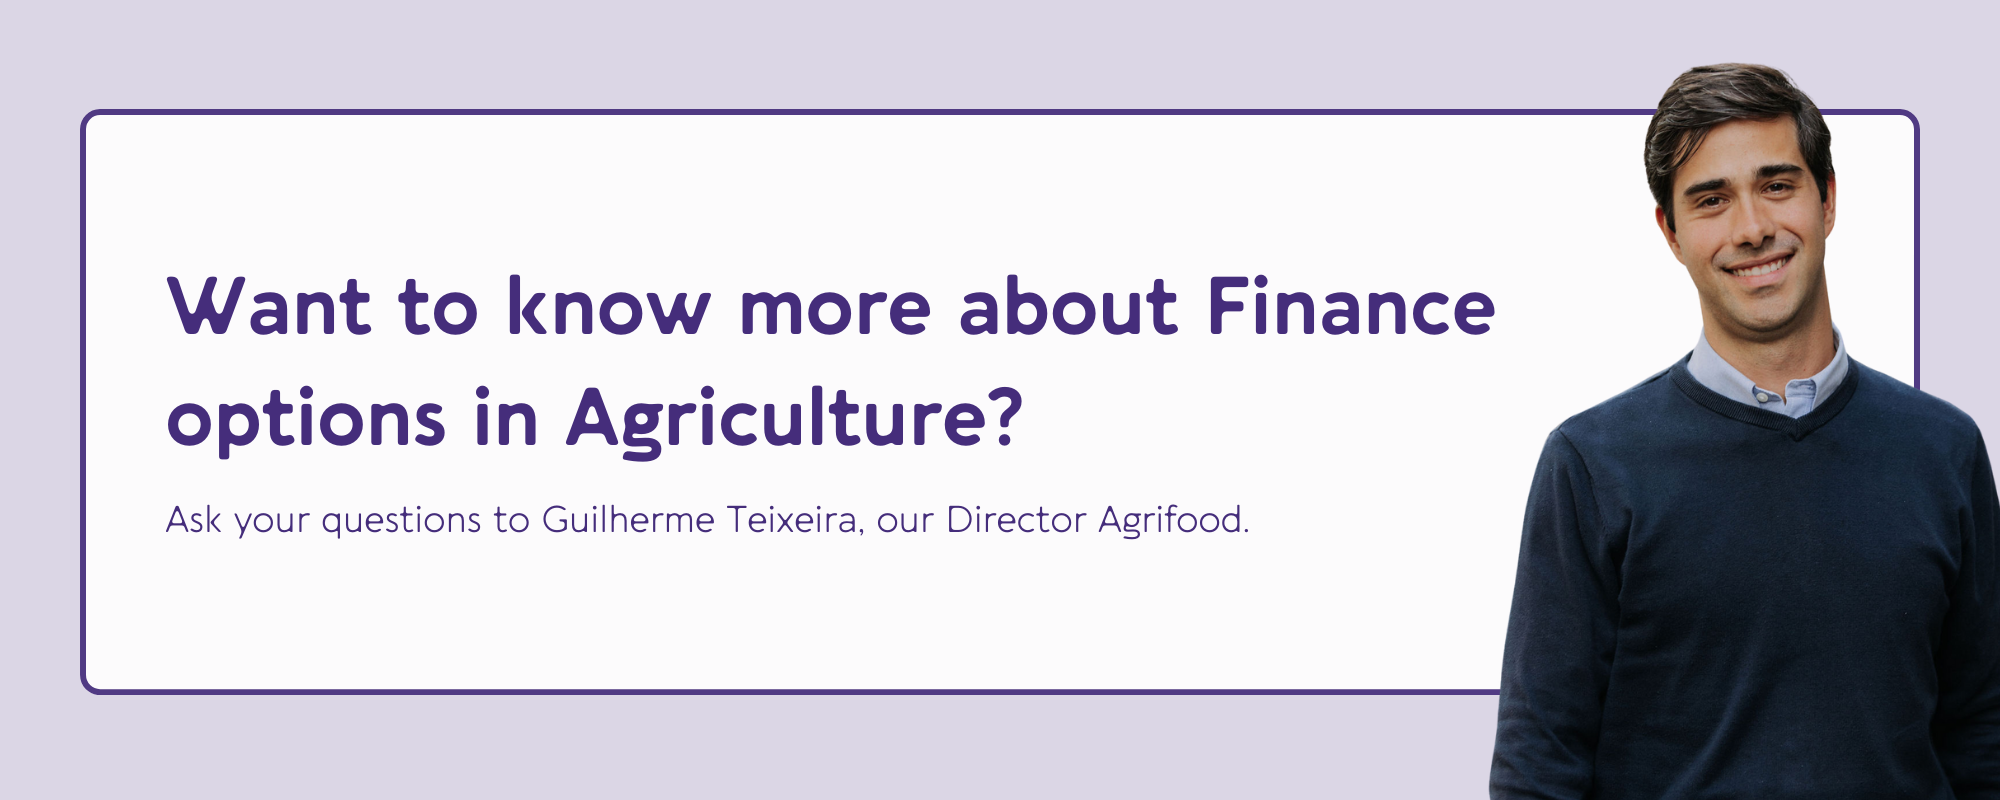 Want to know more about Finance options in Agriculture?